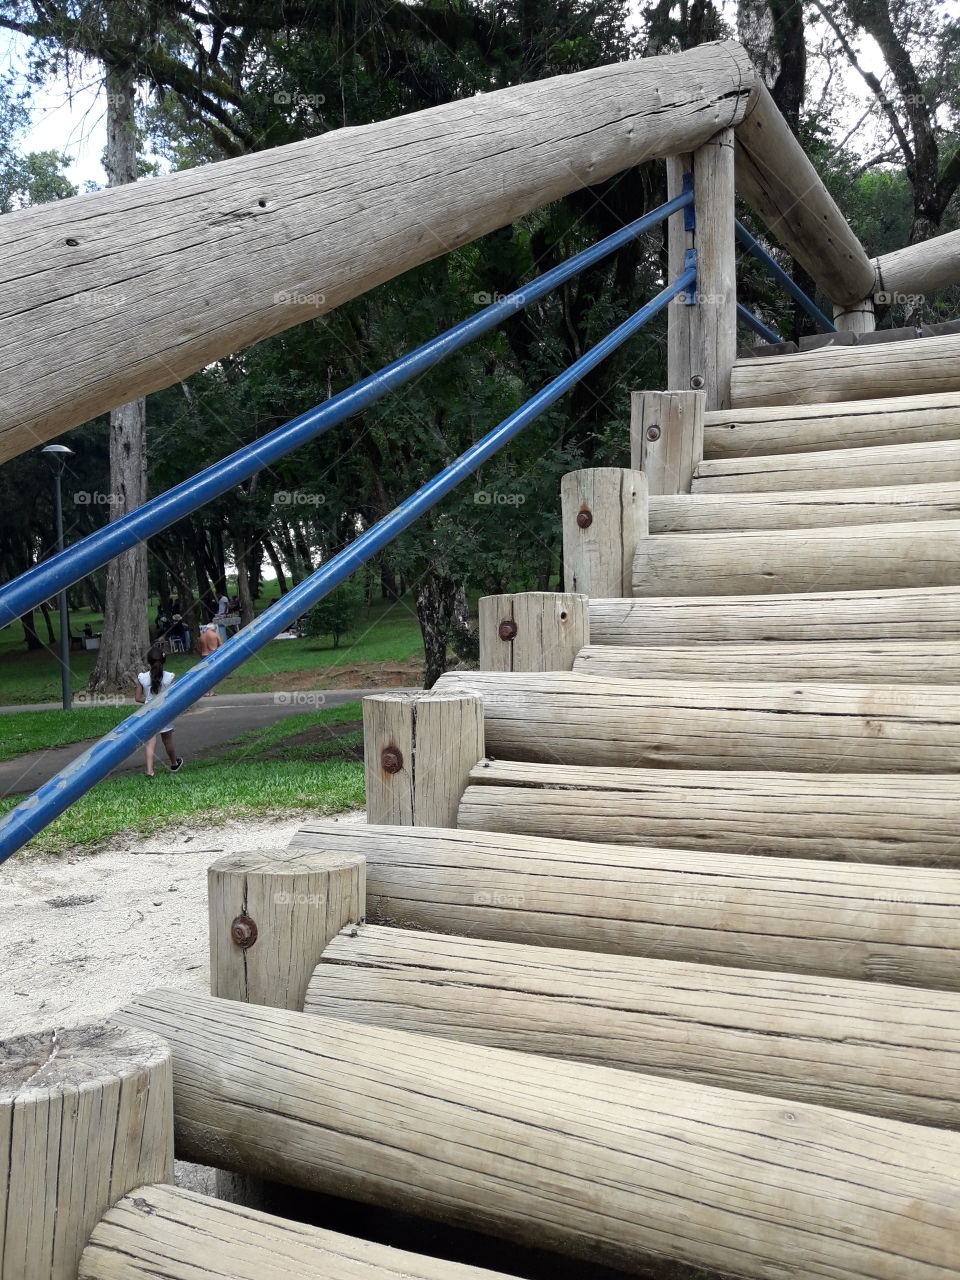 Playground at the Blue Lake Park in Curitiba, Brazil